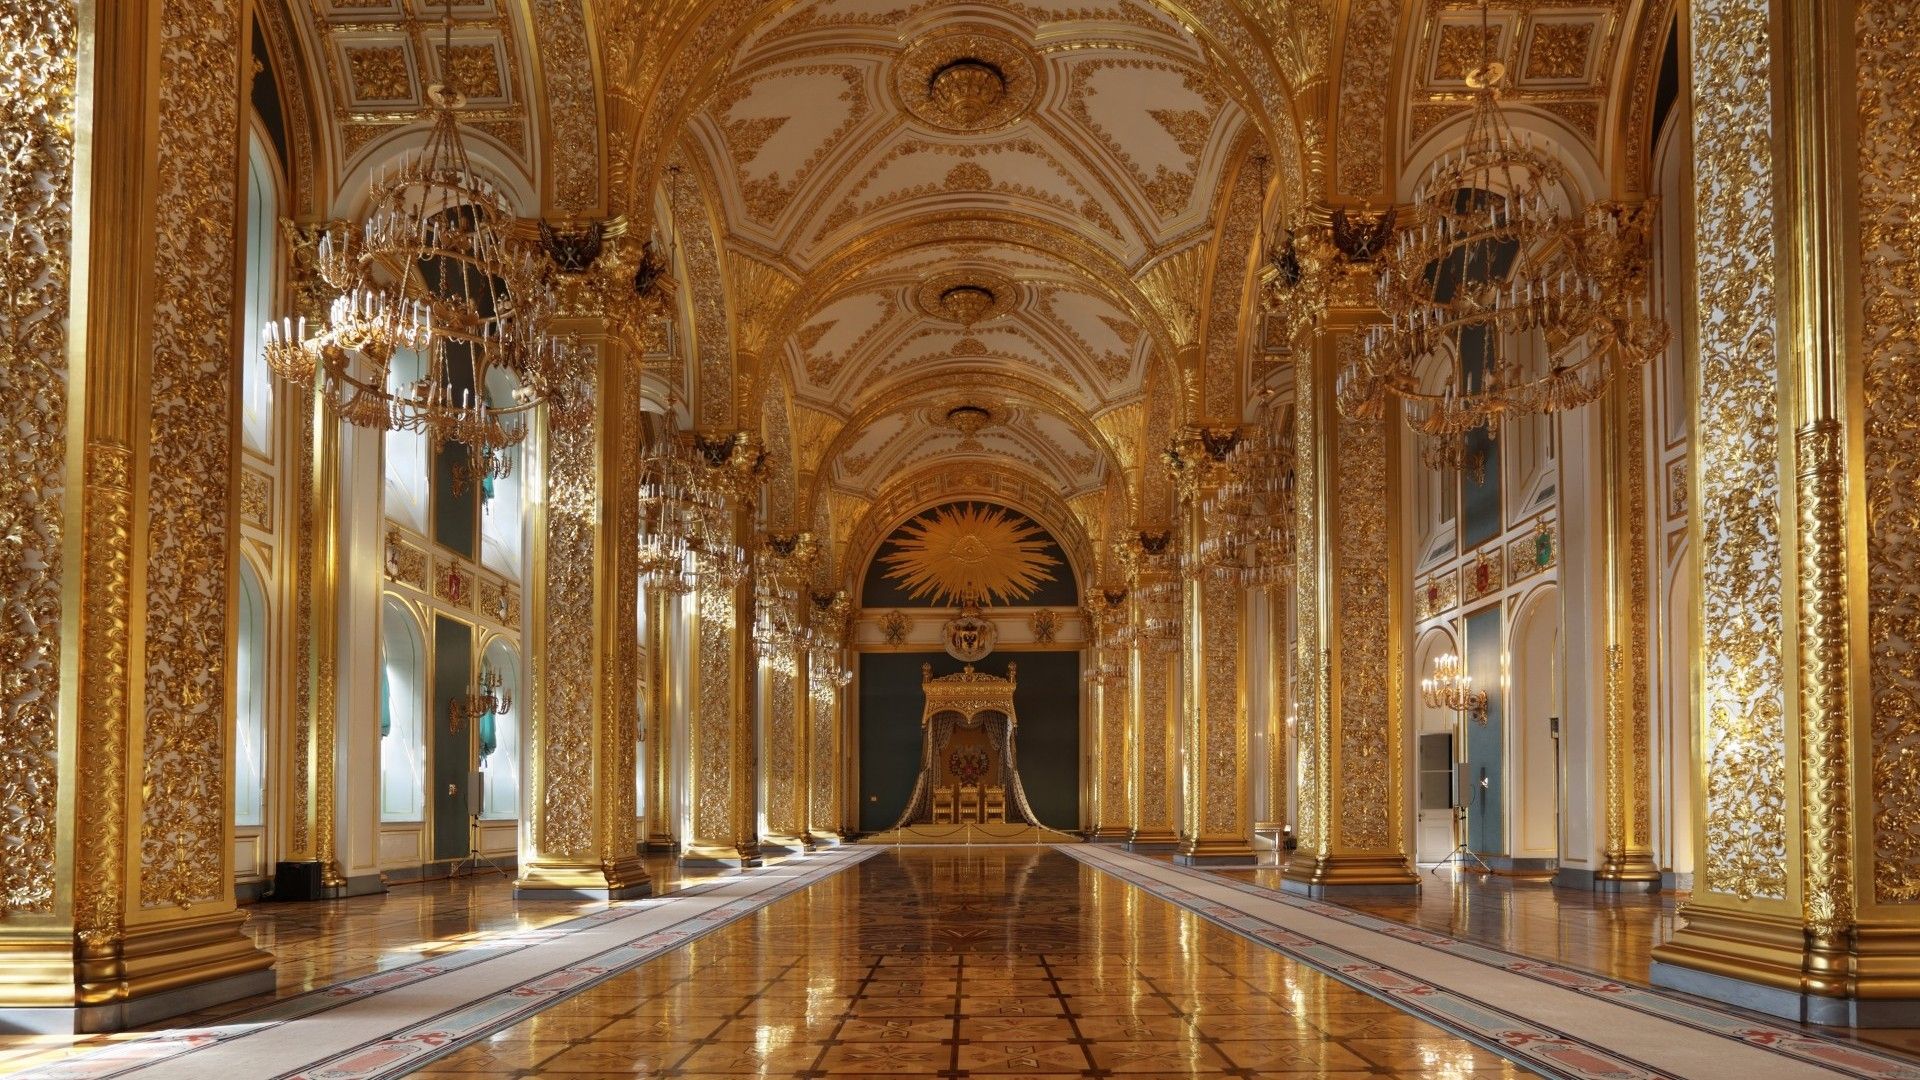 A long hallway with gold decorations on the walls - Royalcore